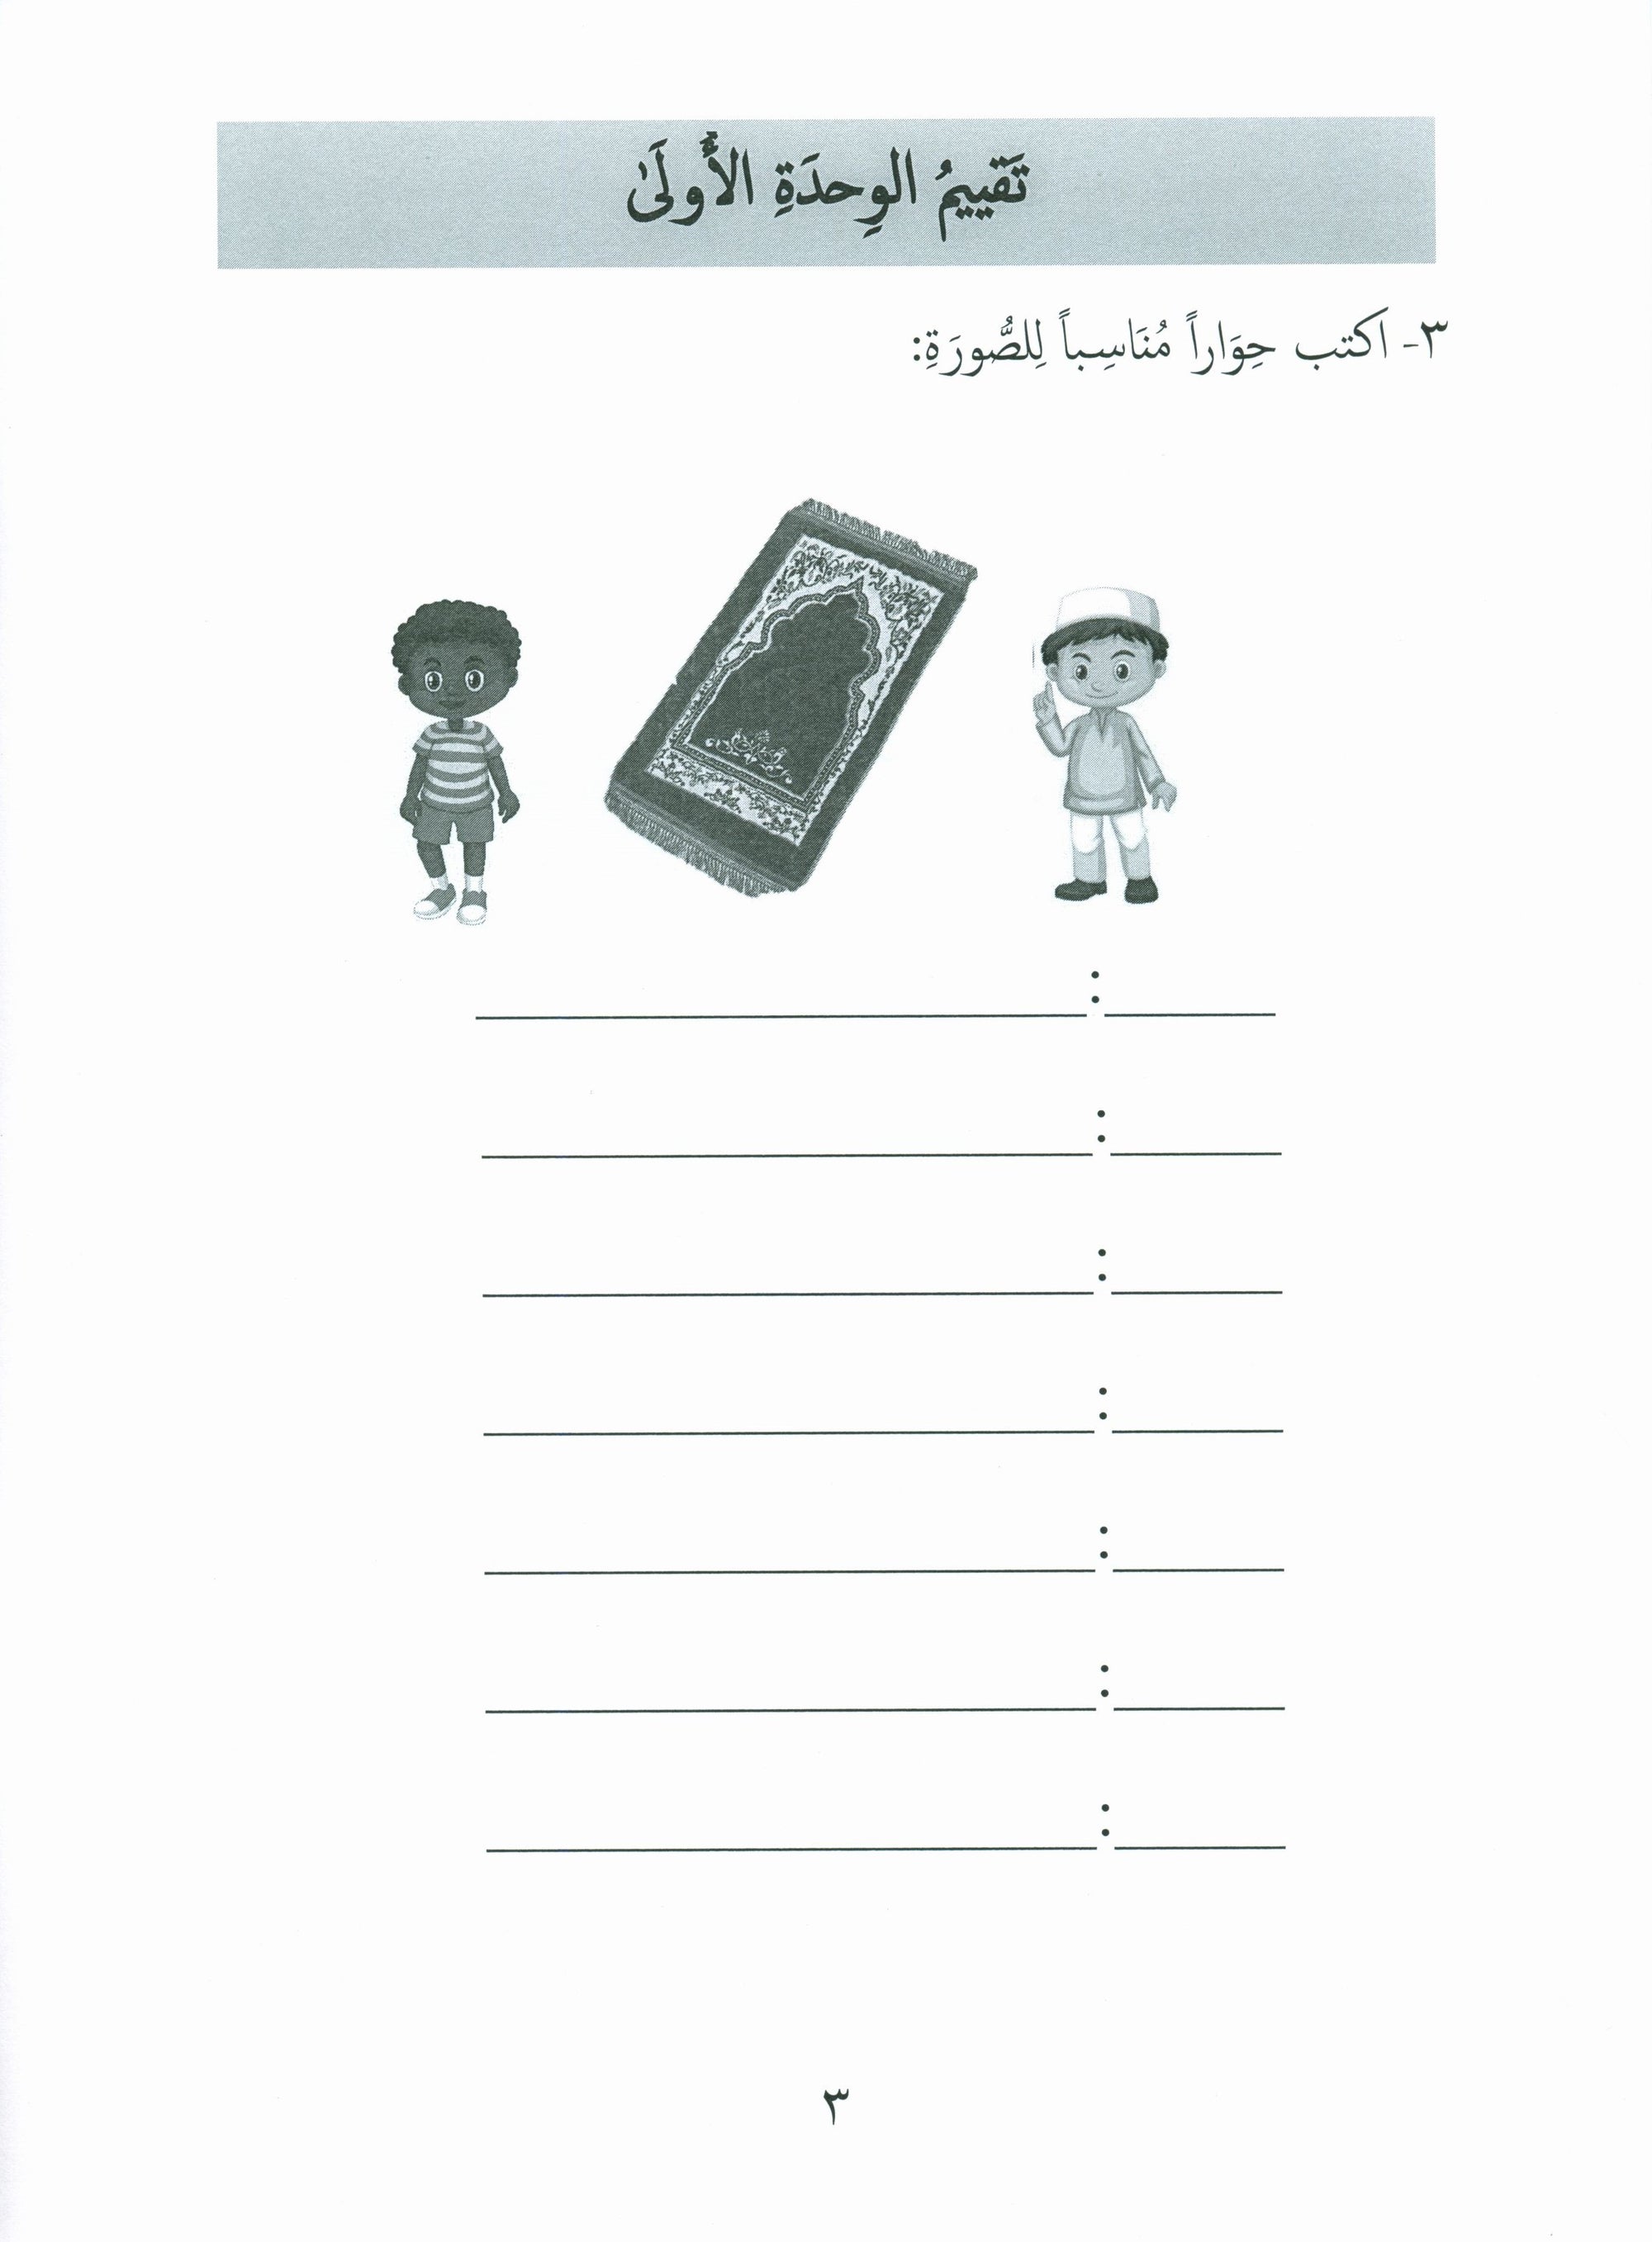 Our Language Is Our Pride Assessment Level 7 لغتنا فخرنا